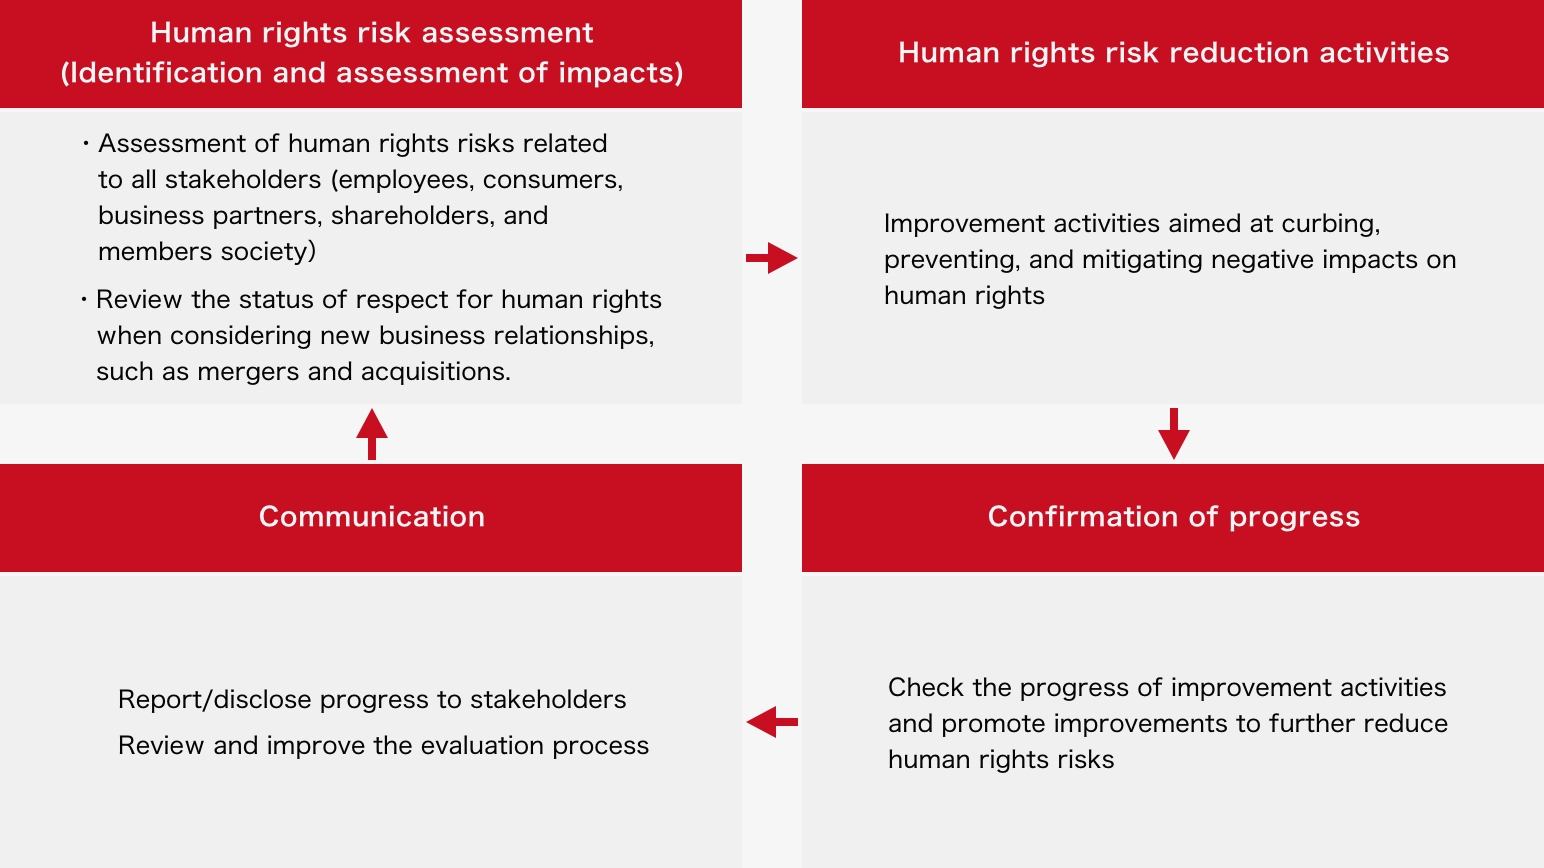 Human Rights Due Diligence Process